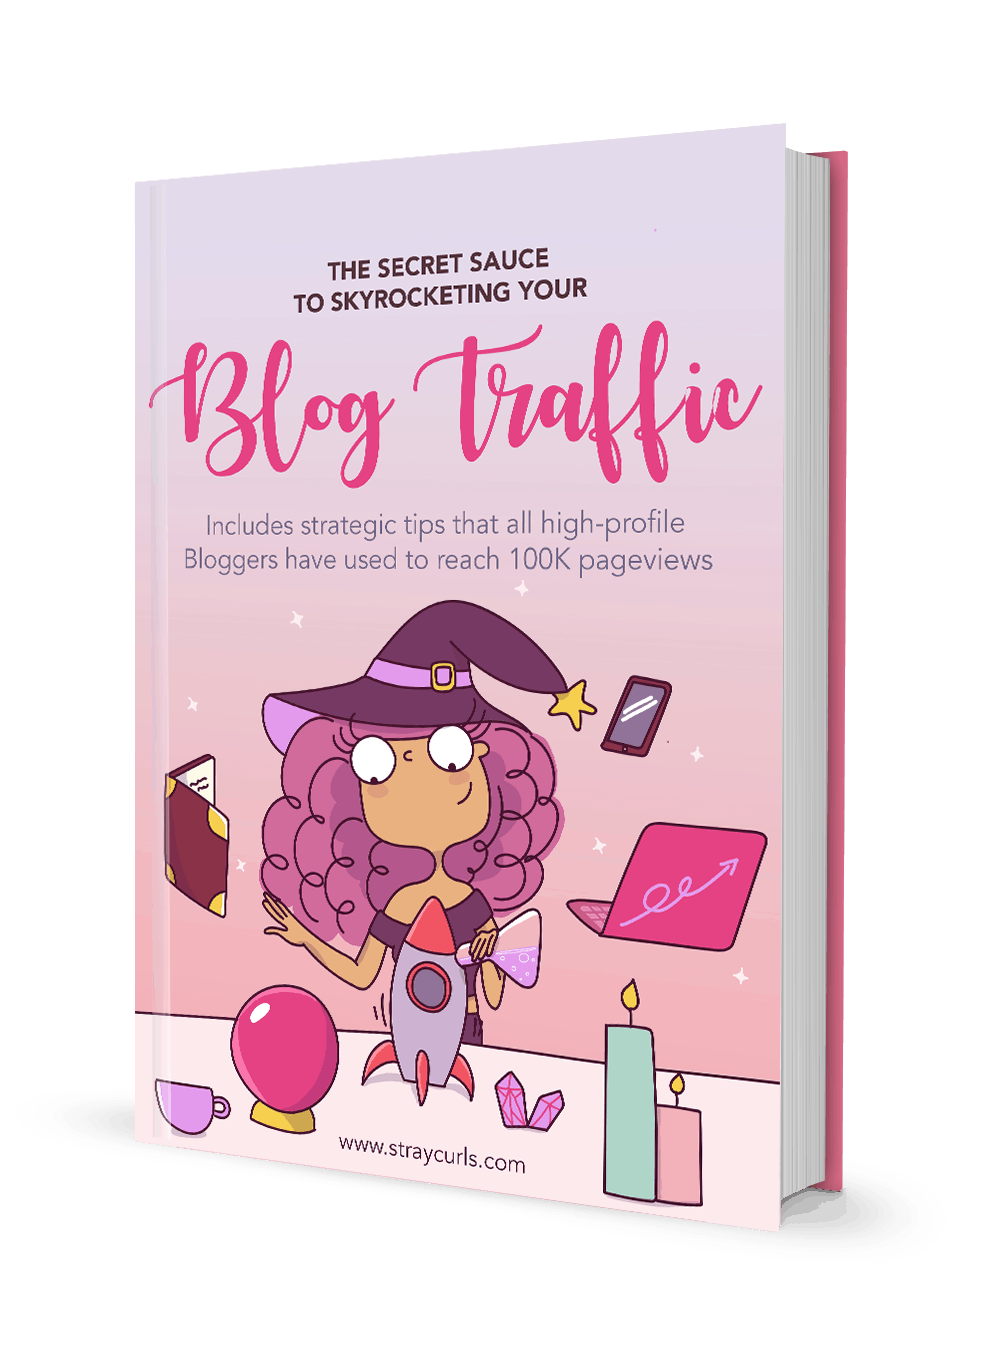 This Blog Traffic eBook will teach you how to grow your blog traffic from scratch so that you can earn more money with your blog.